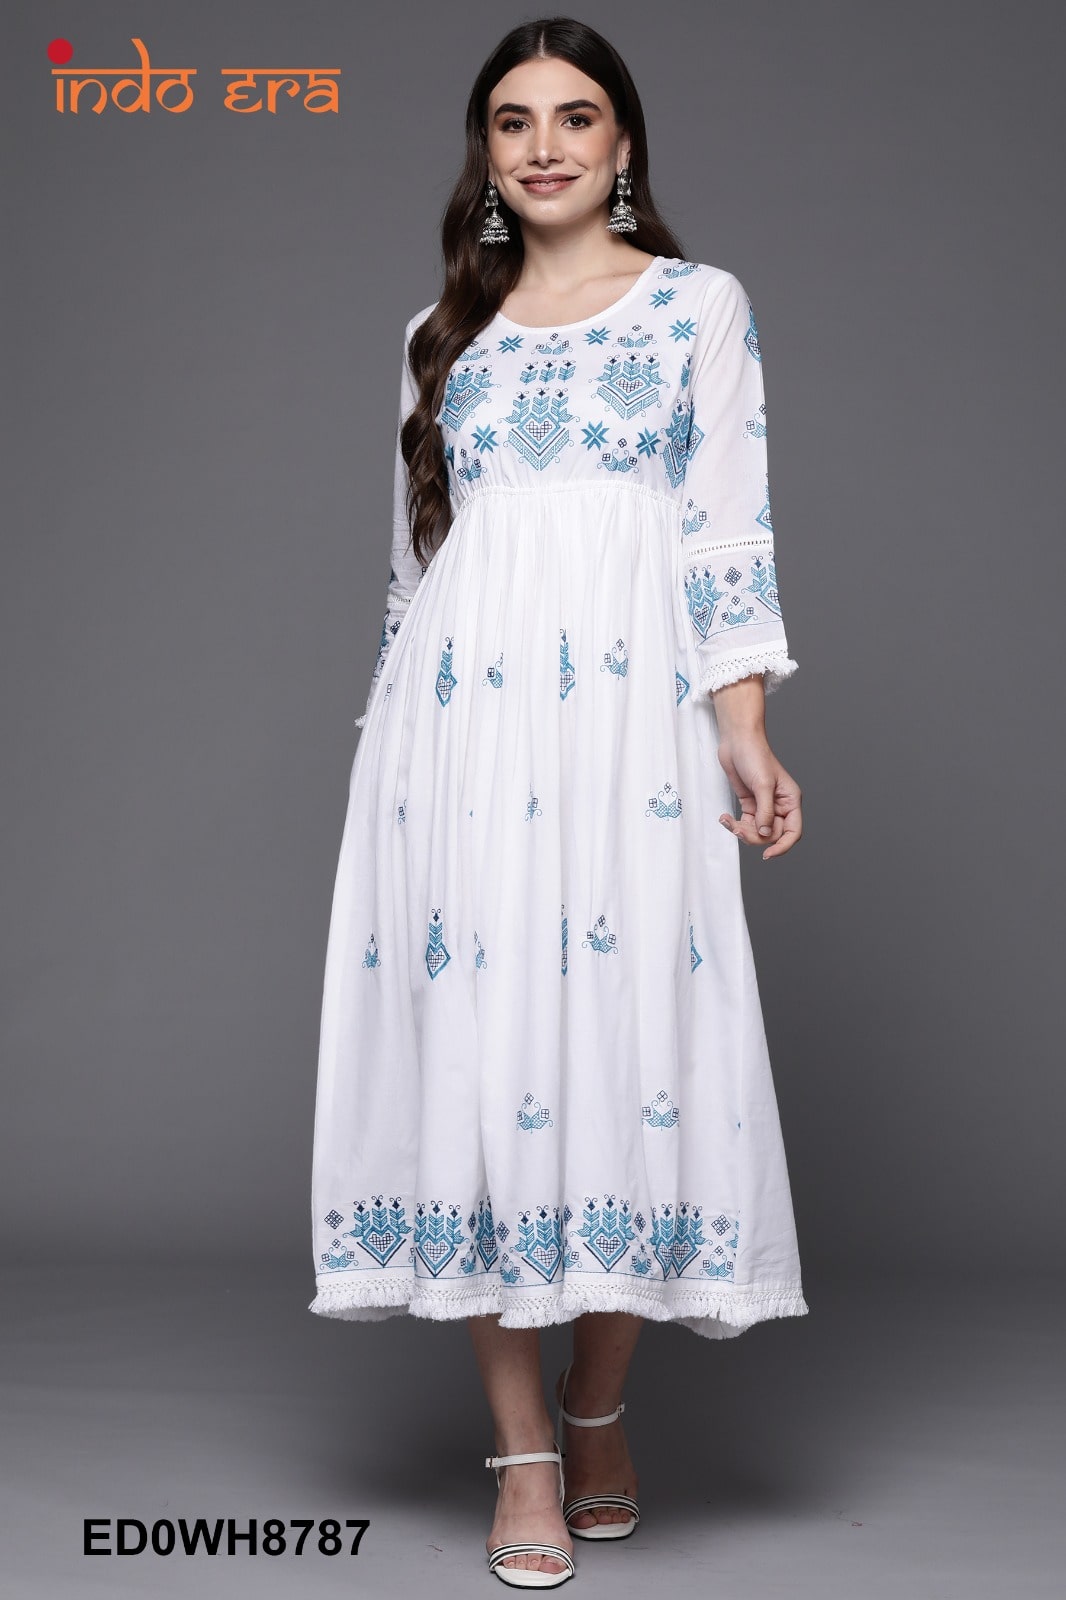 Ethnic Gowns | white Ethnic Dress For Women | Freeup